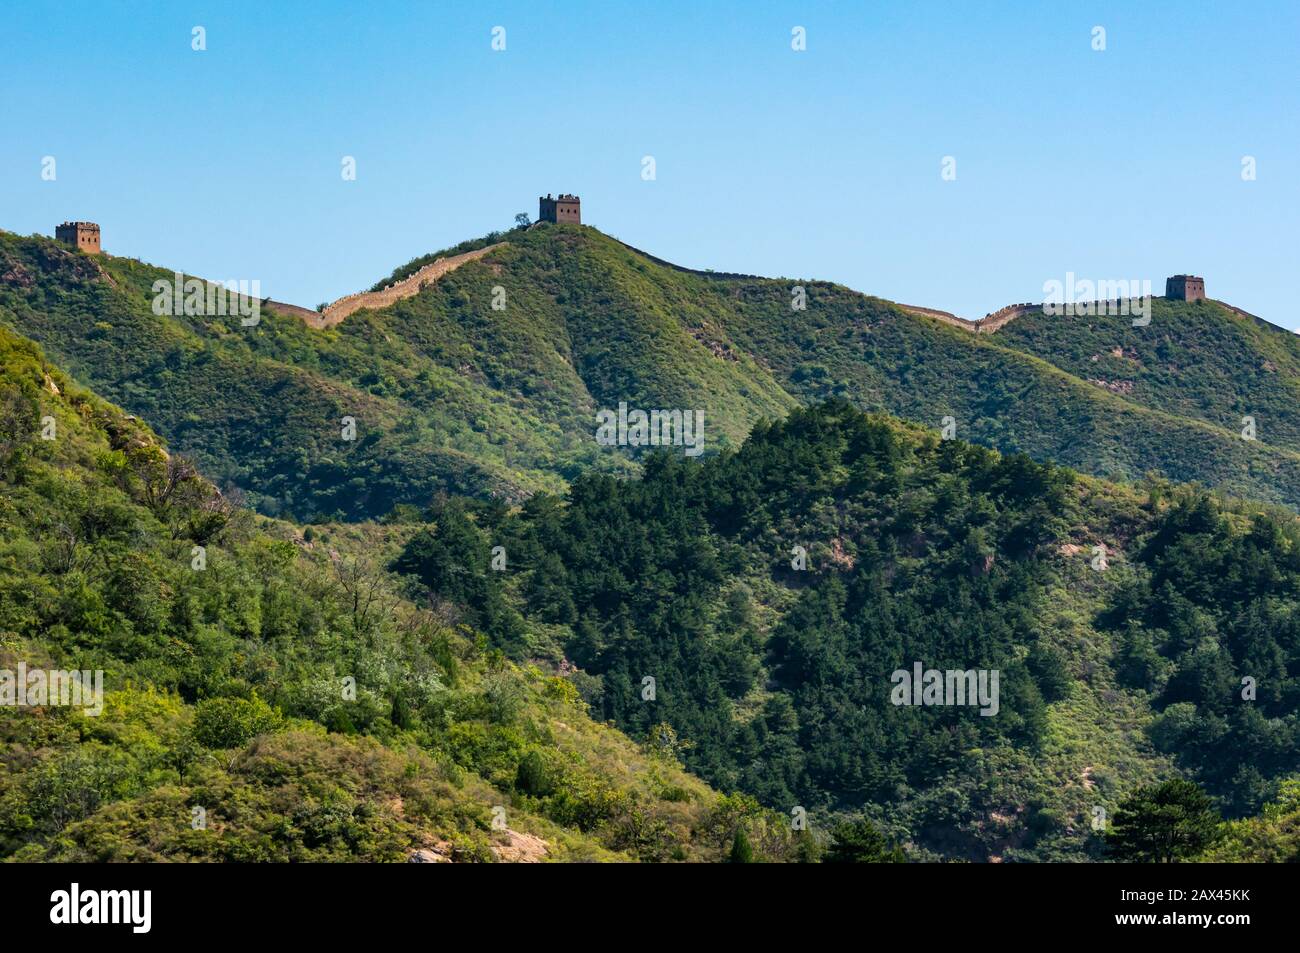 Ming dynasty Jinshanling Great Wall of China wiht watch towers on mountain ridge in sunny weather, Hebei Province, China, Asia Stock Photo